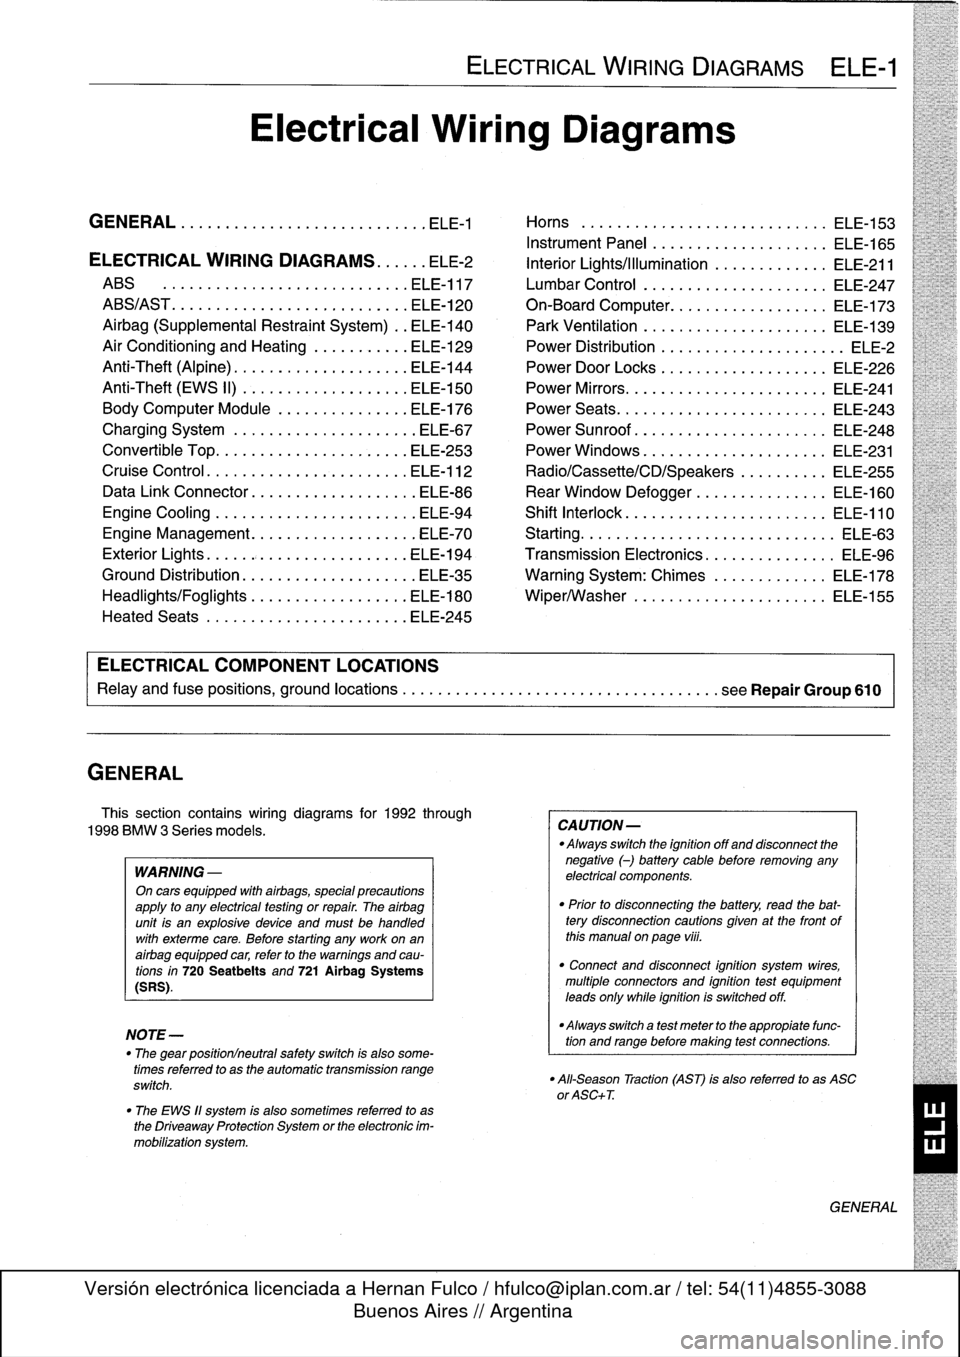 BMW 318i 1996 E36 Owners Manual 
GENERAL

This
section
contains
wiring
diagrams
for
1992
through

1998
BMW
3
Series
models
.

WARNING
-

On
cars
equipped
with
airbags,
special
precautions
apply
to
any
electrical
testing
or
repair
.
